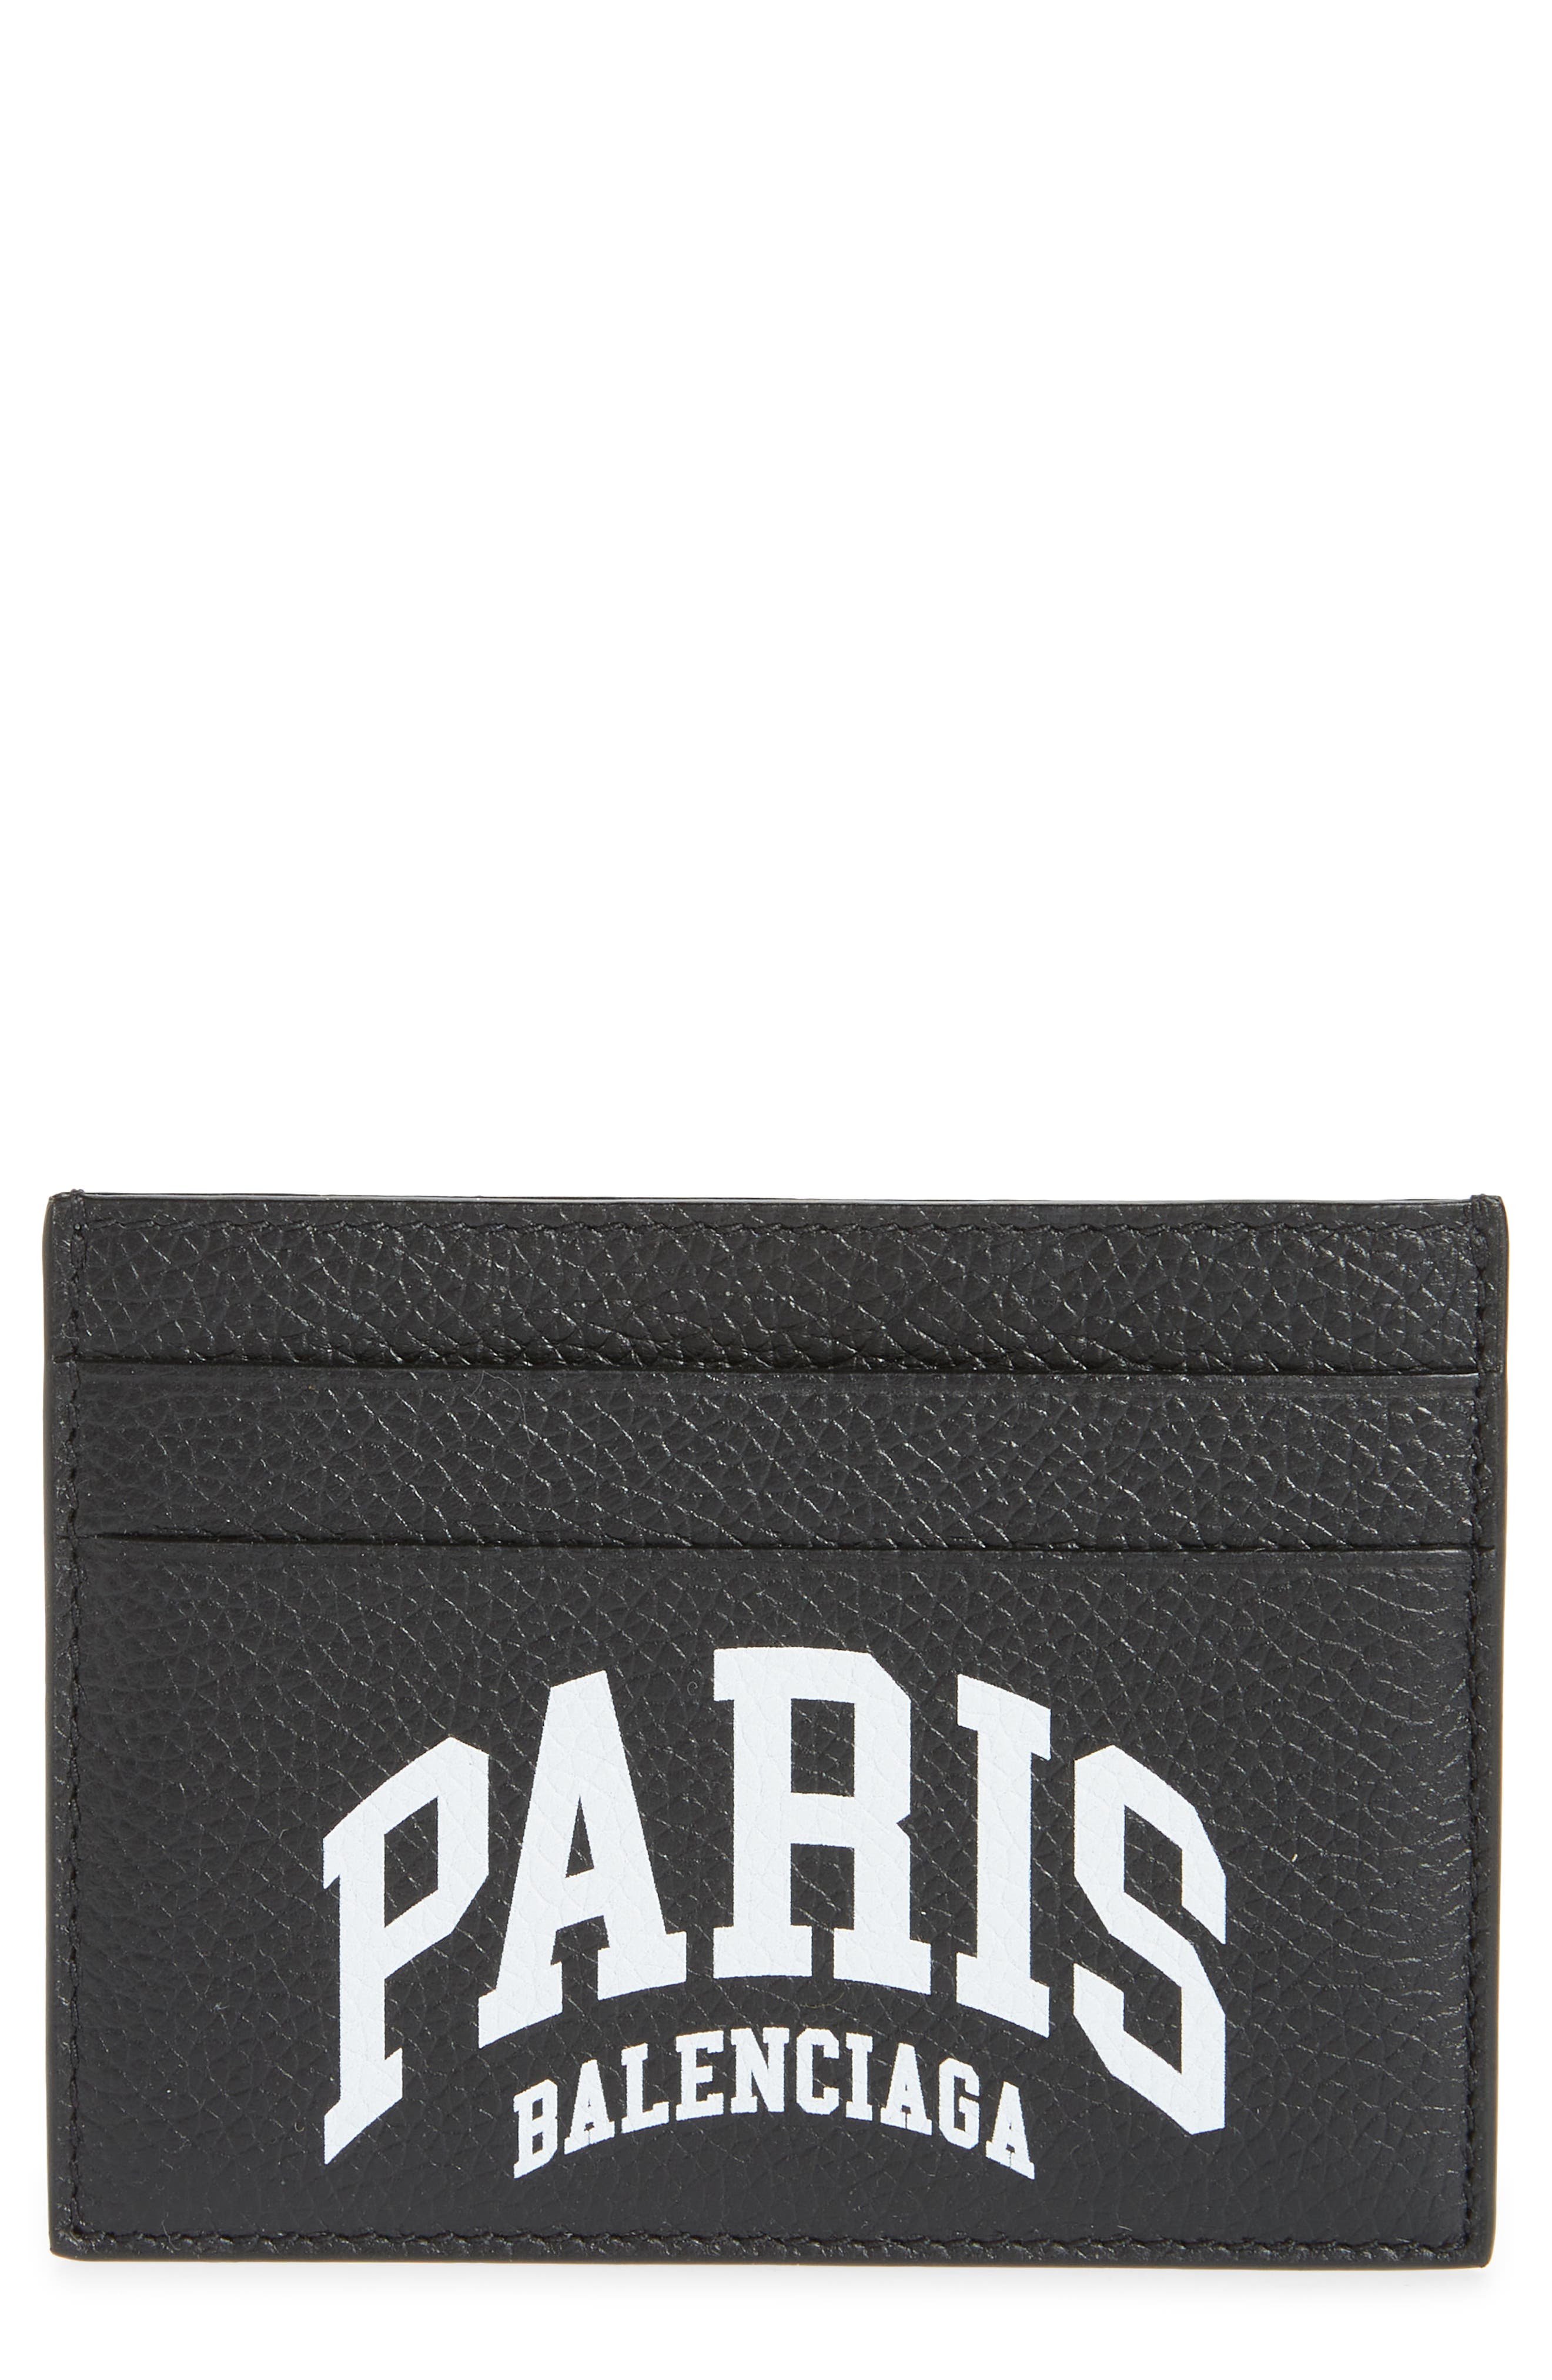 Balenciaga Leather Card Holder in Black/White Paris at Nordstrom